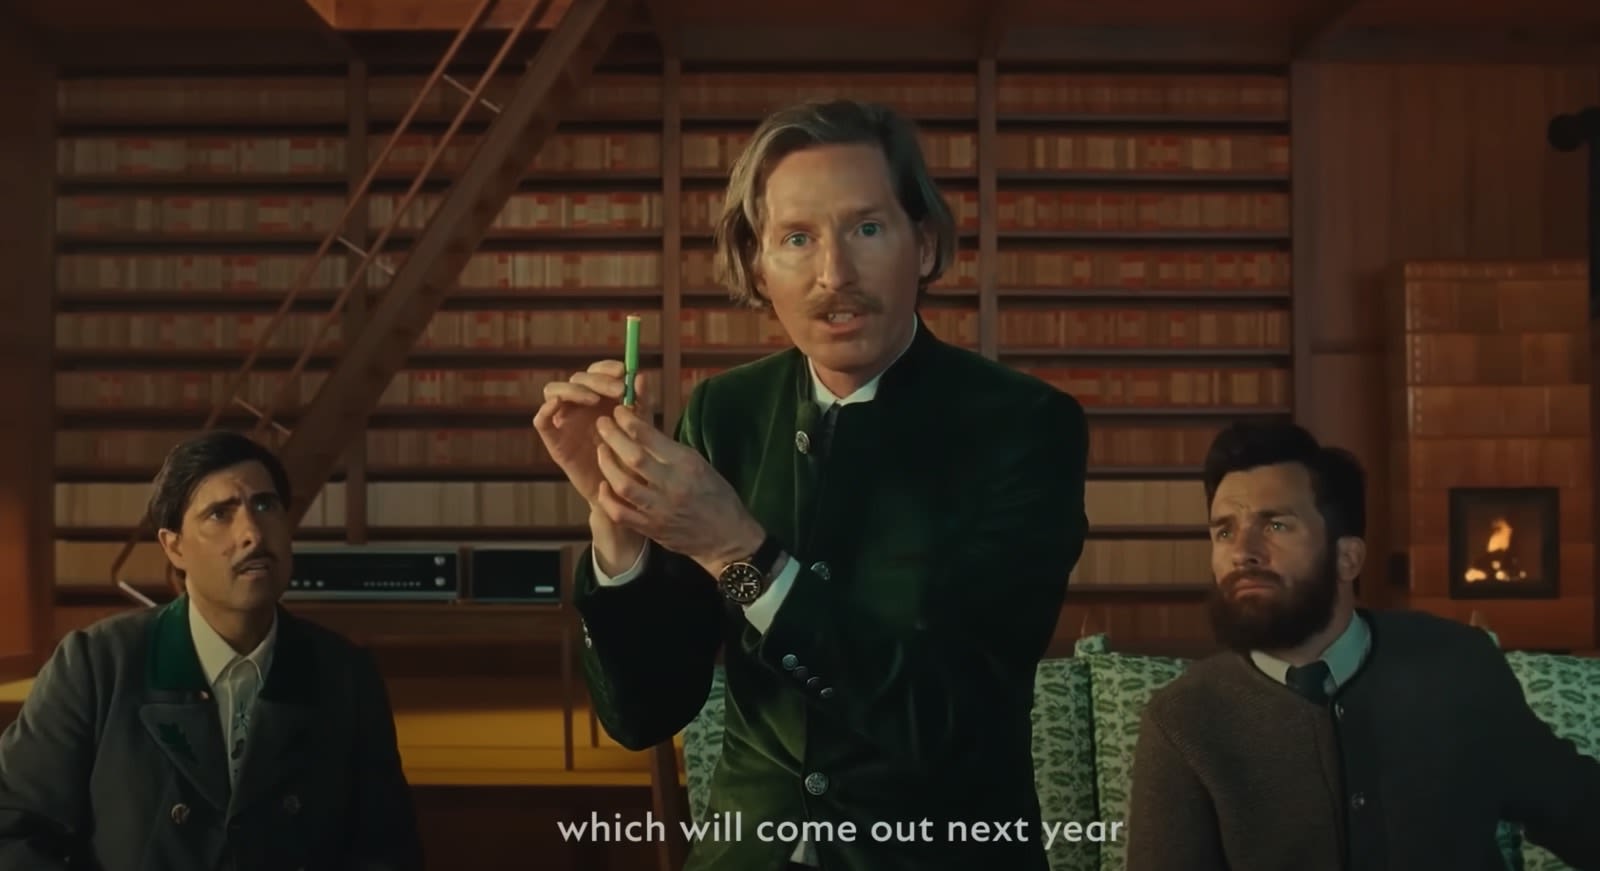 Maybe Apple should hire Wes Anderson for its next M4 iPad Pro commercial